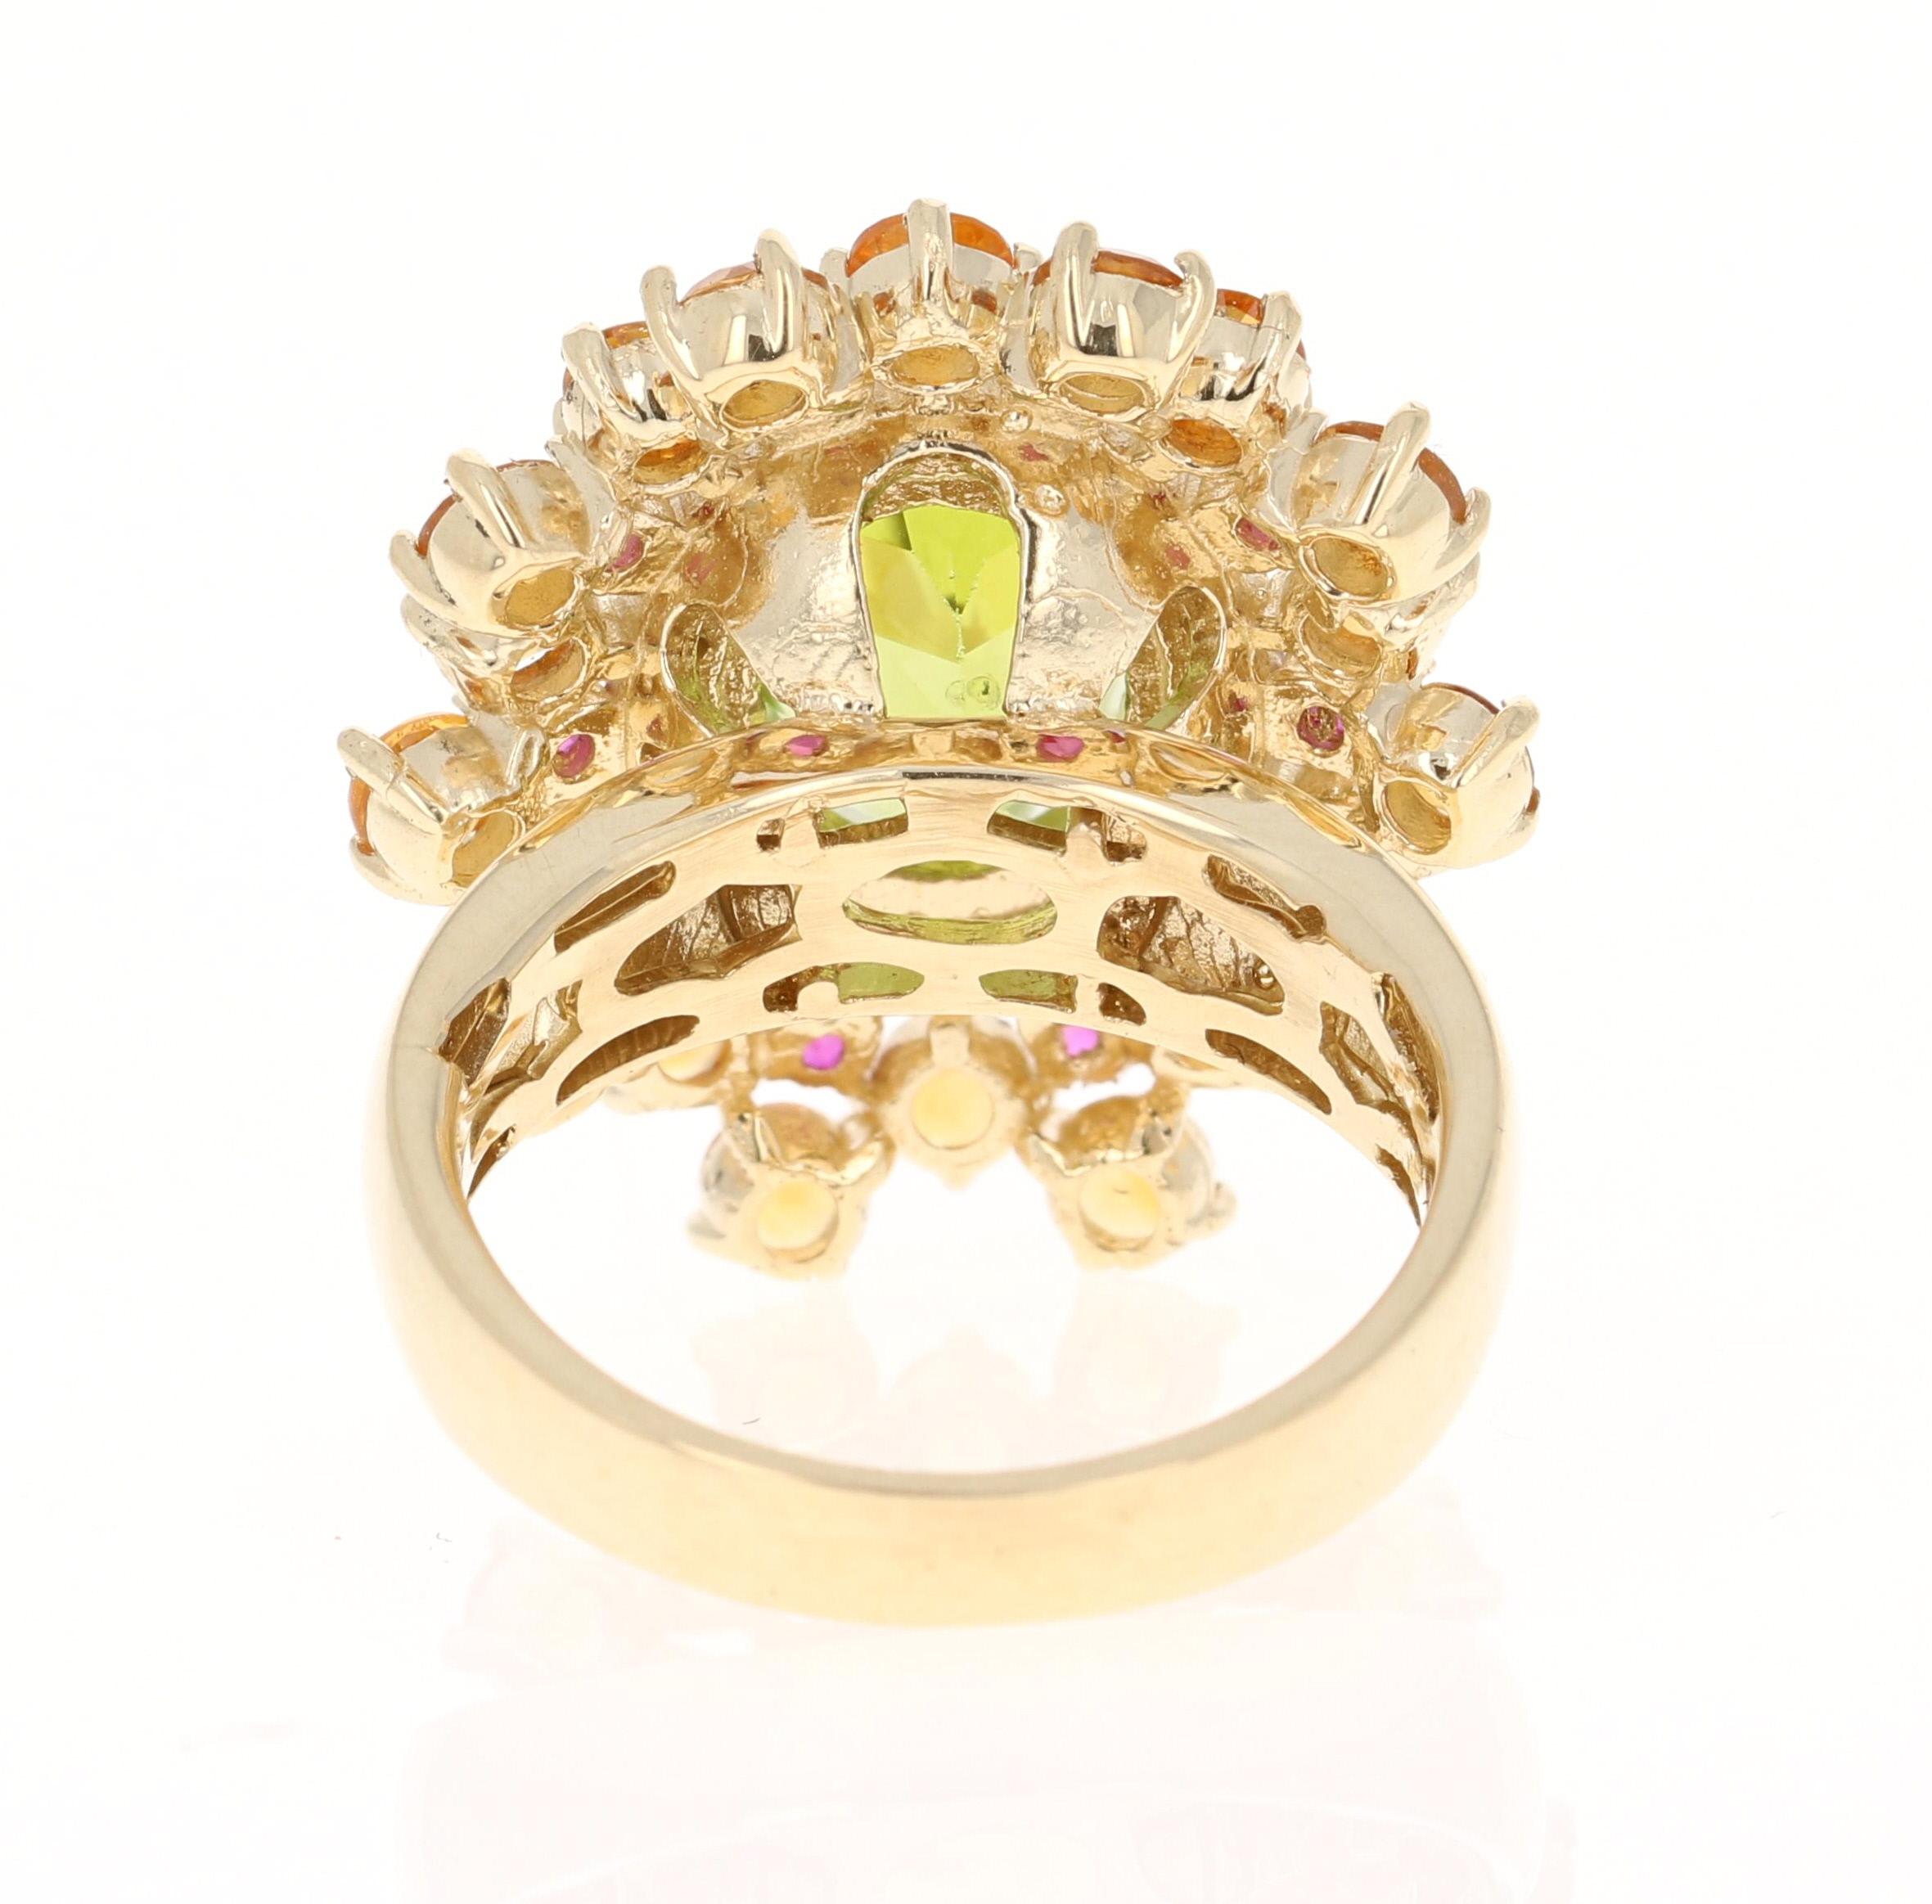 Oval Cut 6.15 Carat Peridot Sapphire Diamond Yellow Gold Cocktail Ring For Sale